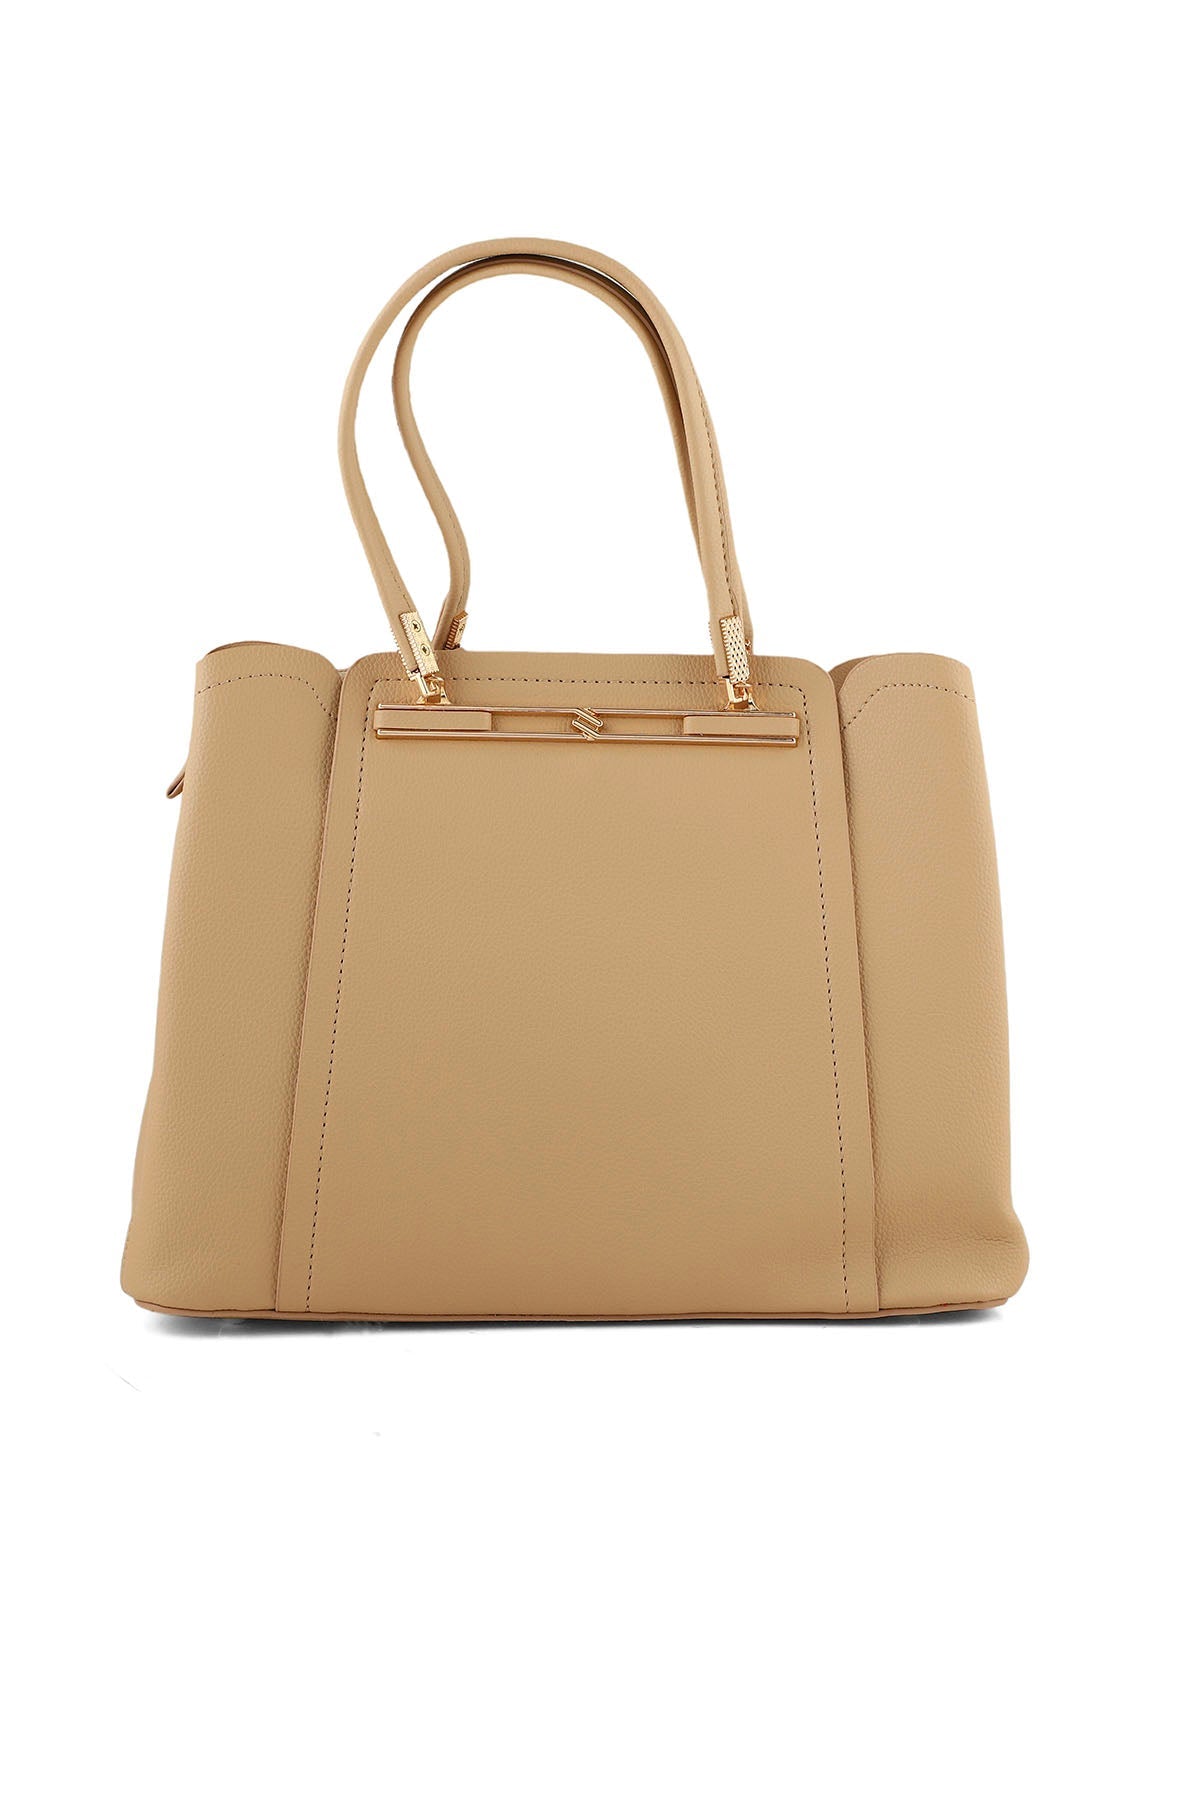 Formal Tote Hand Bags B15126-Fawn